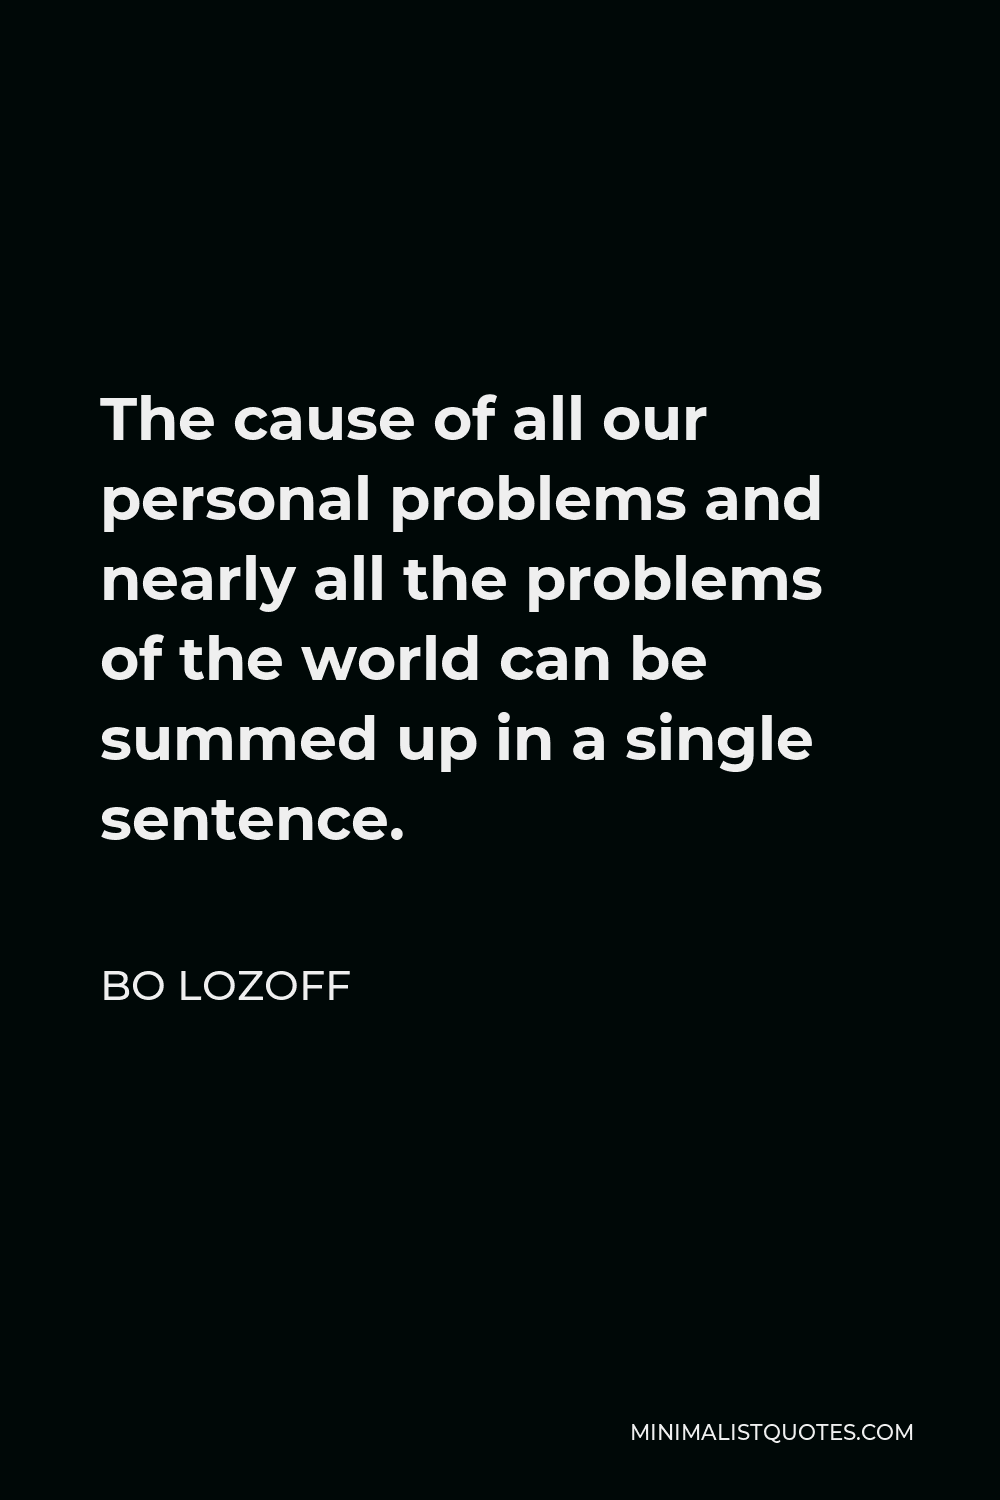 Bo Lozoff Quote - The cause of all our personal problems and nearly all the problems of the world can be summed up in a single sentence.